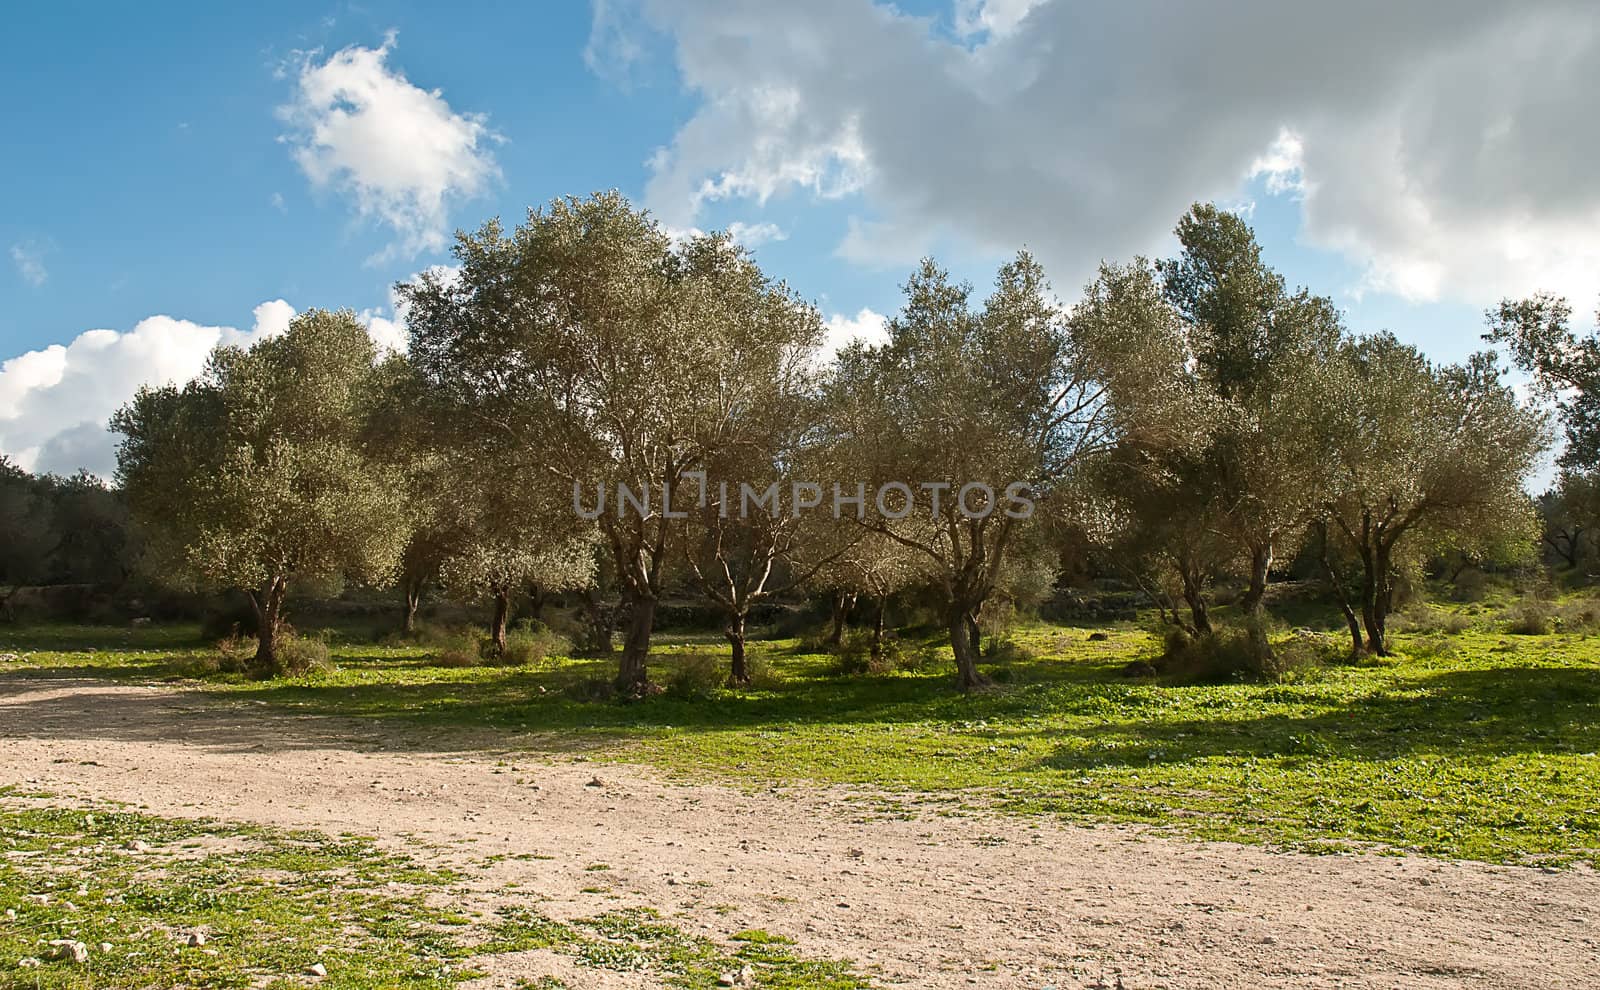 Rows of olive trees in the country. Spring. Israel.